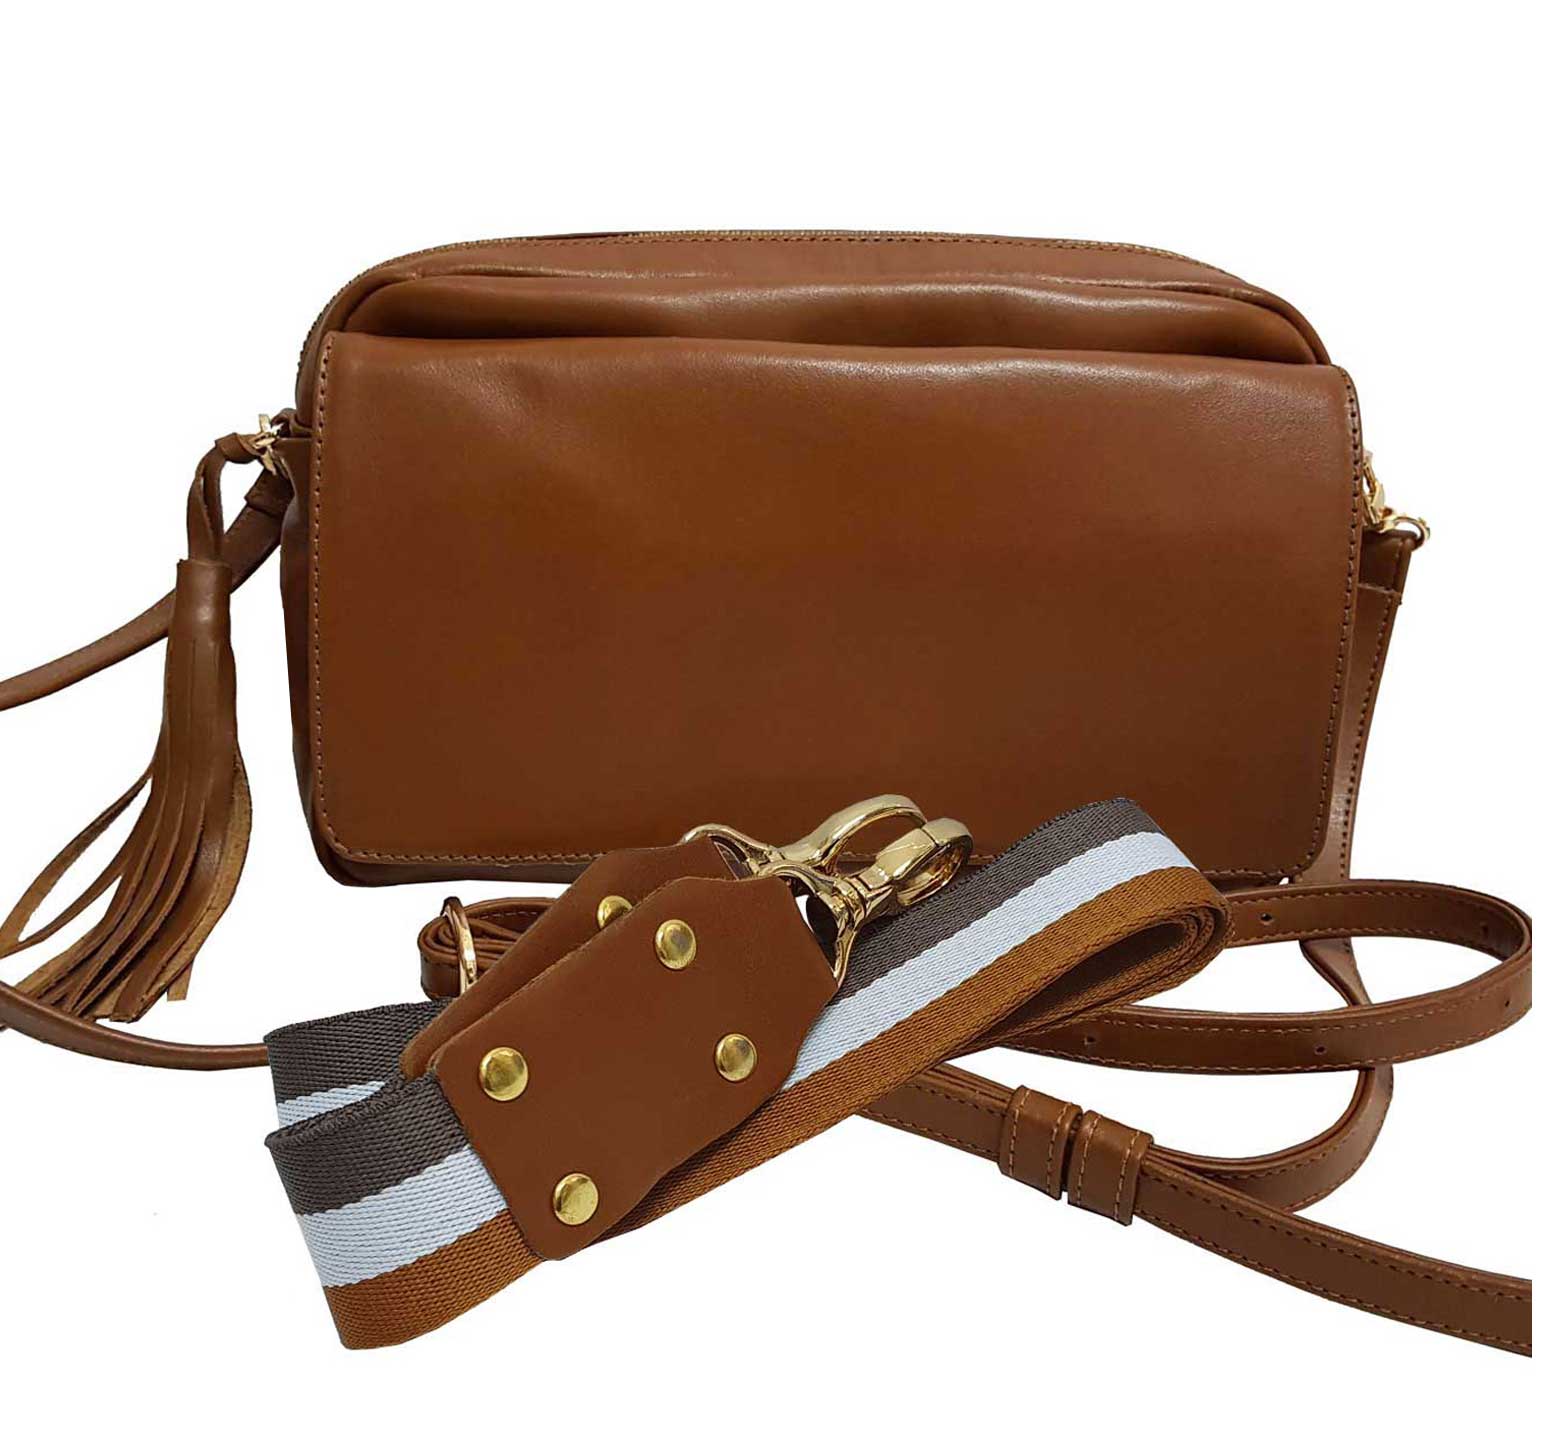 Mcraft® Brown Leather Cross Body Strap Extender 16mm Wide. 